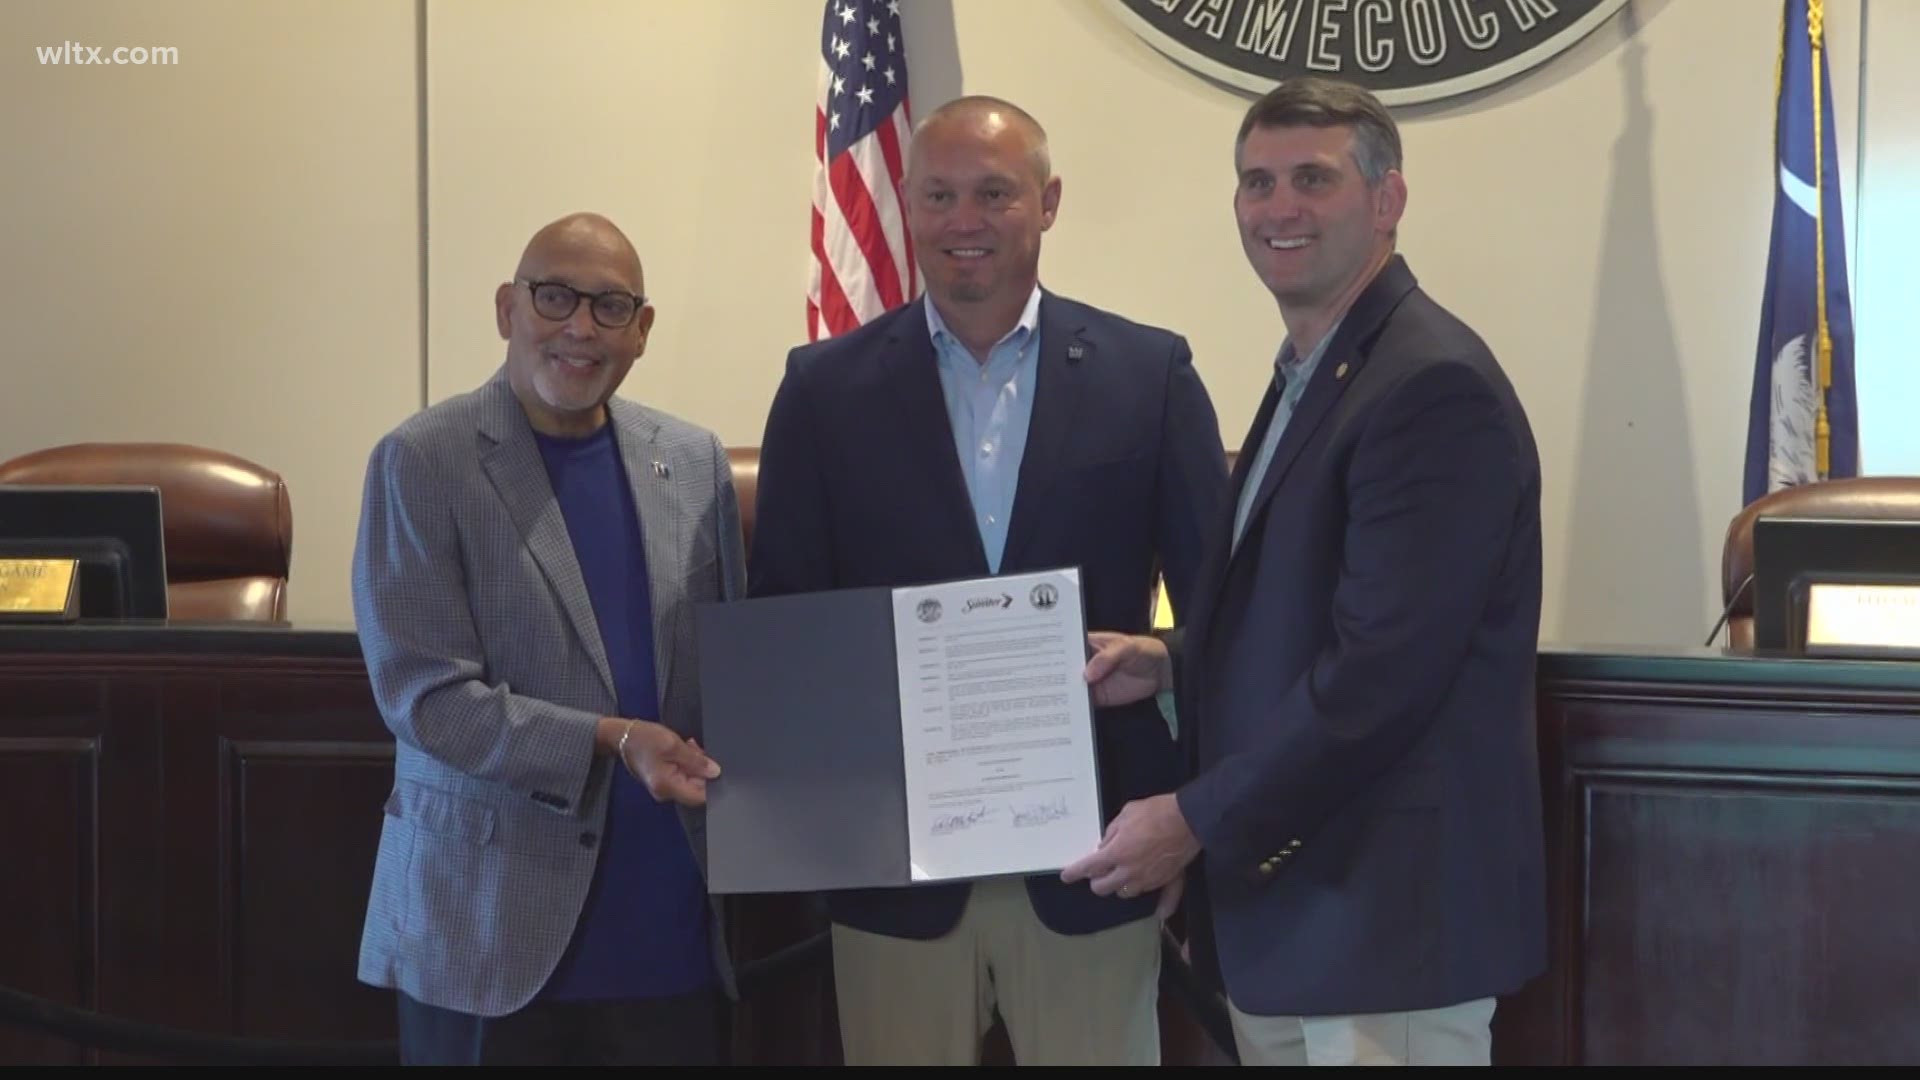 Sumter Mayor David Merchant alongside County Council Chair Jim McCain signed a joint-proclamation Monday declaring May 3 – 7 Small Business Week in the community.